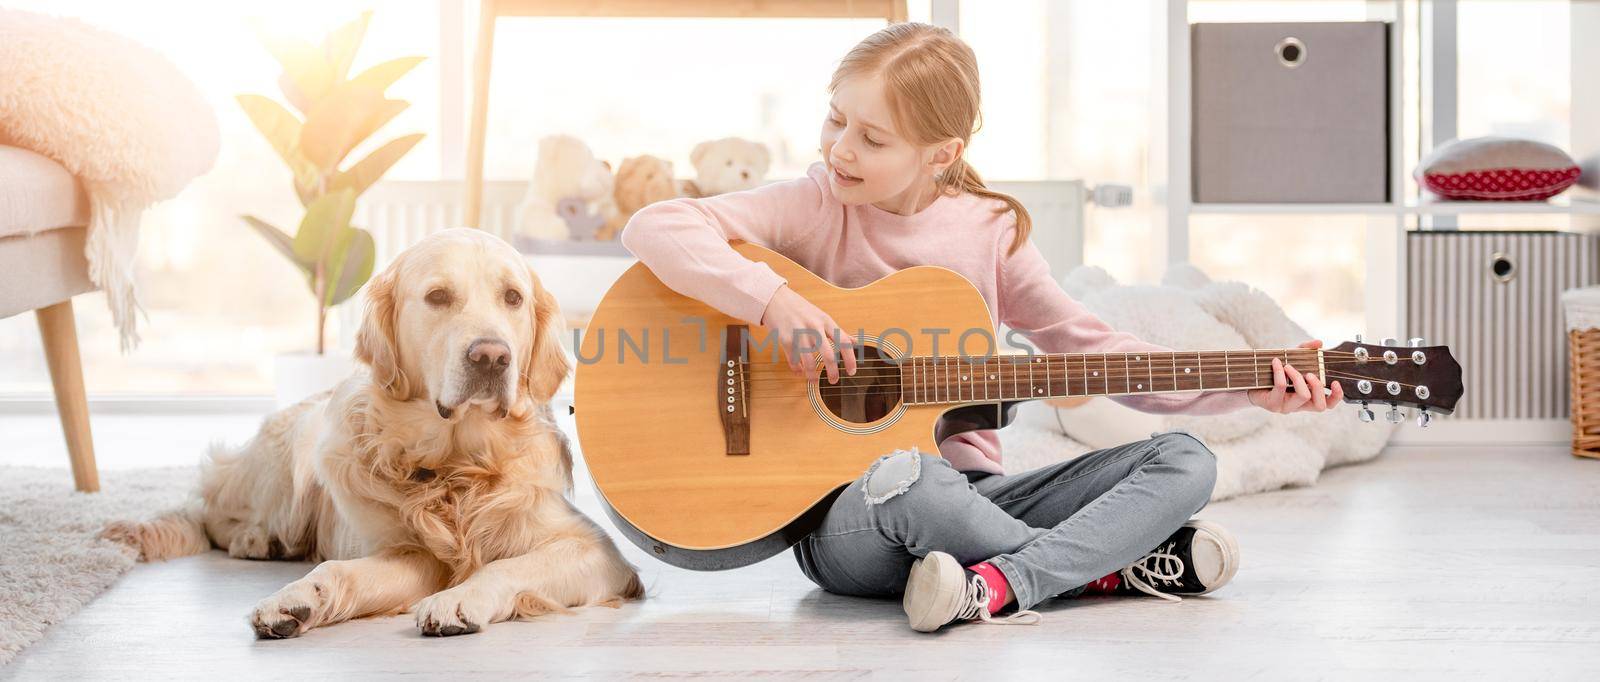 Little girl with guitar and golden retriever dog by tan4ikk1